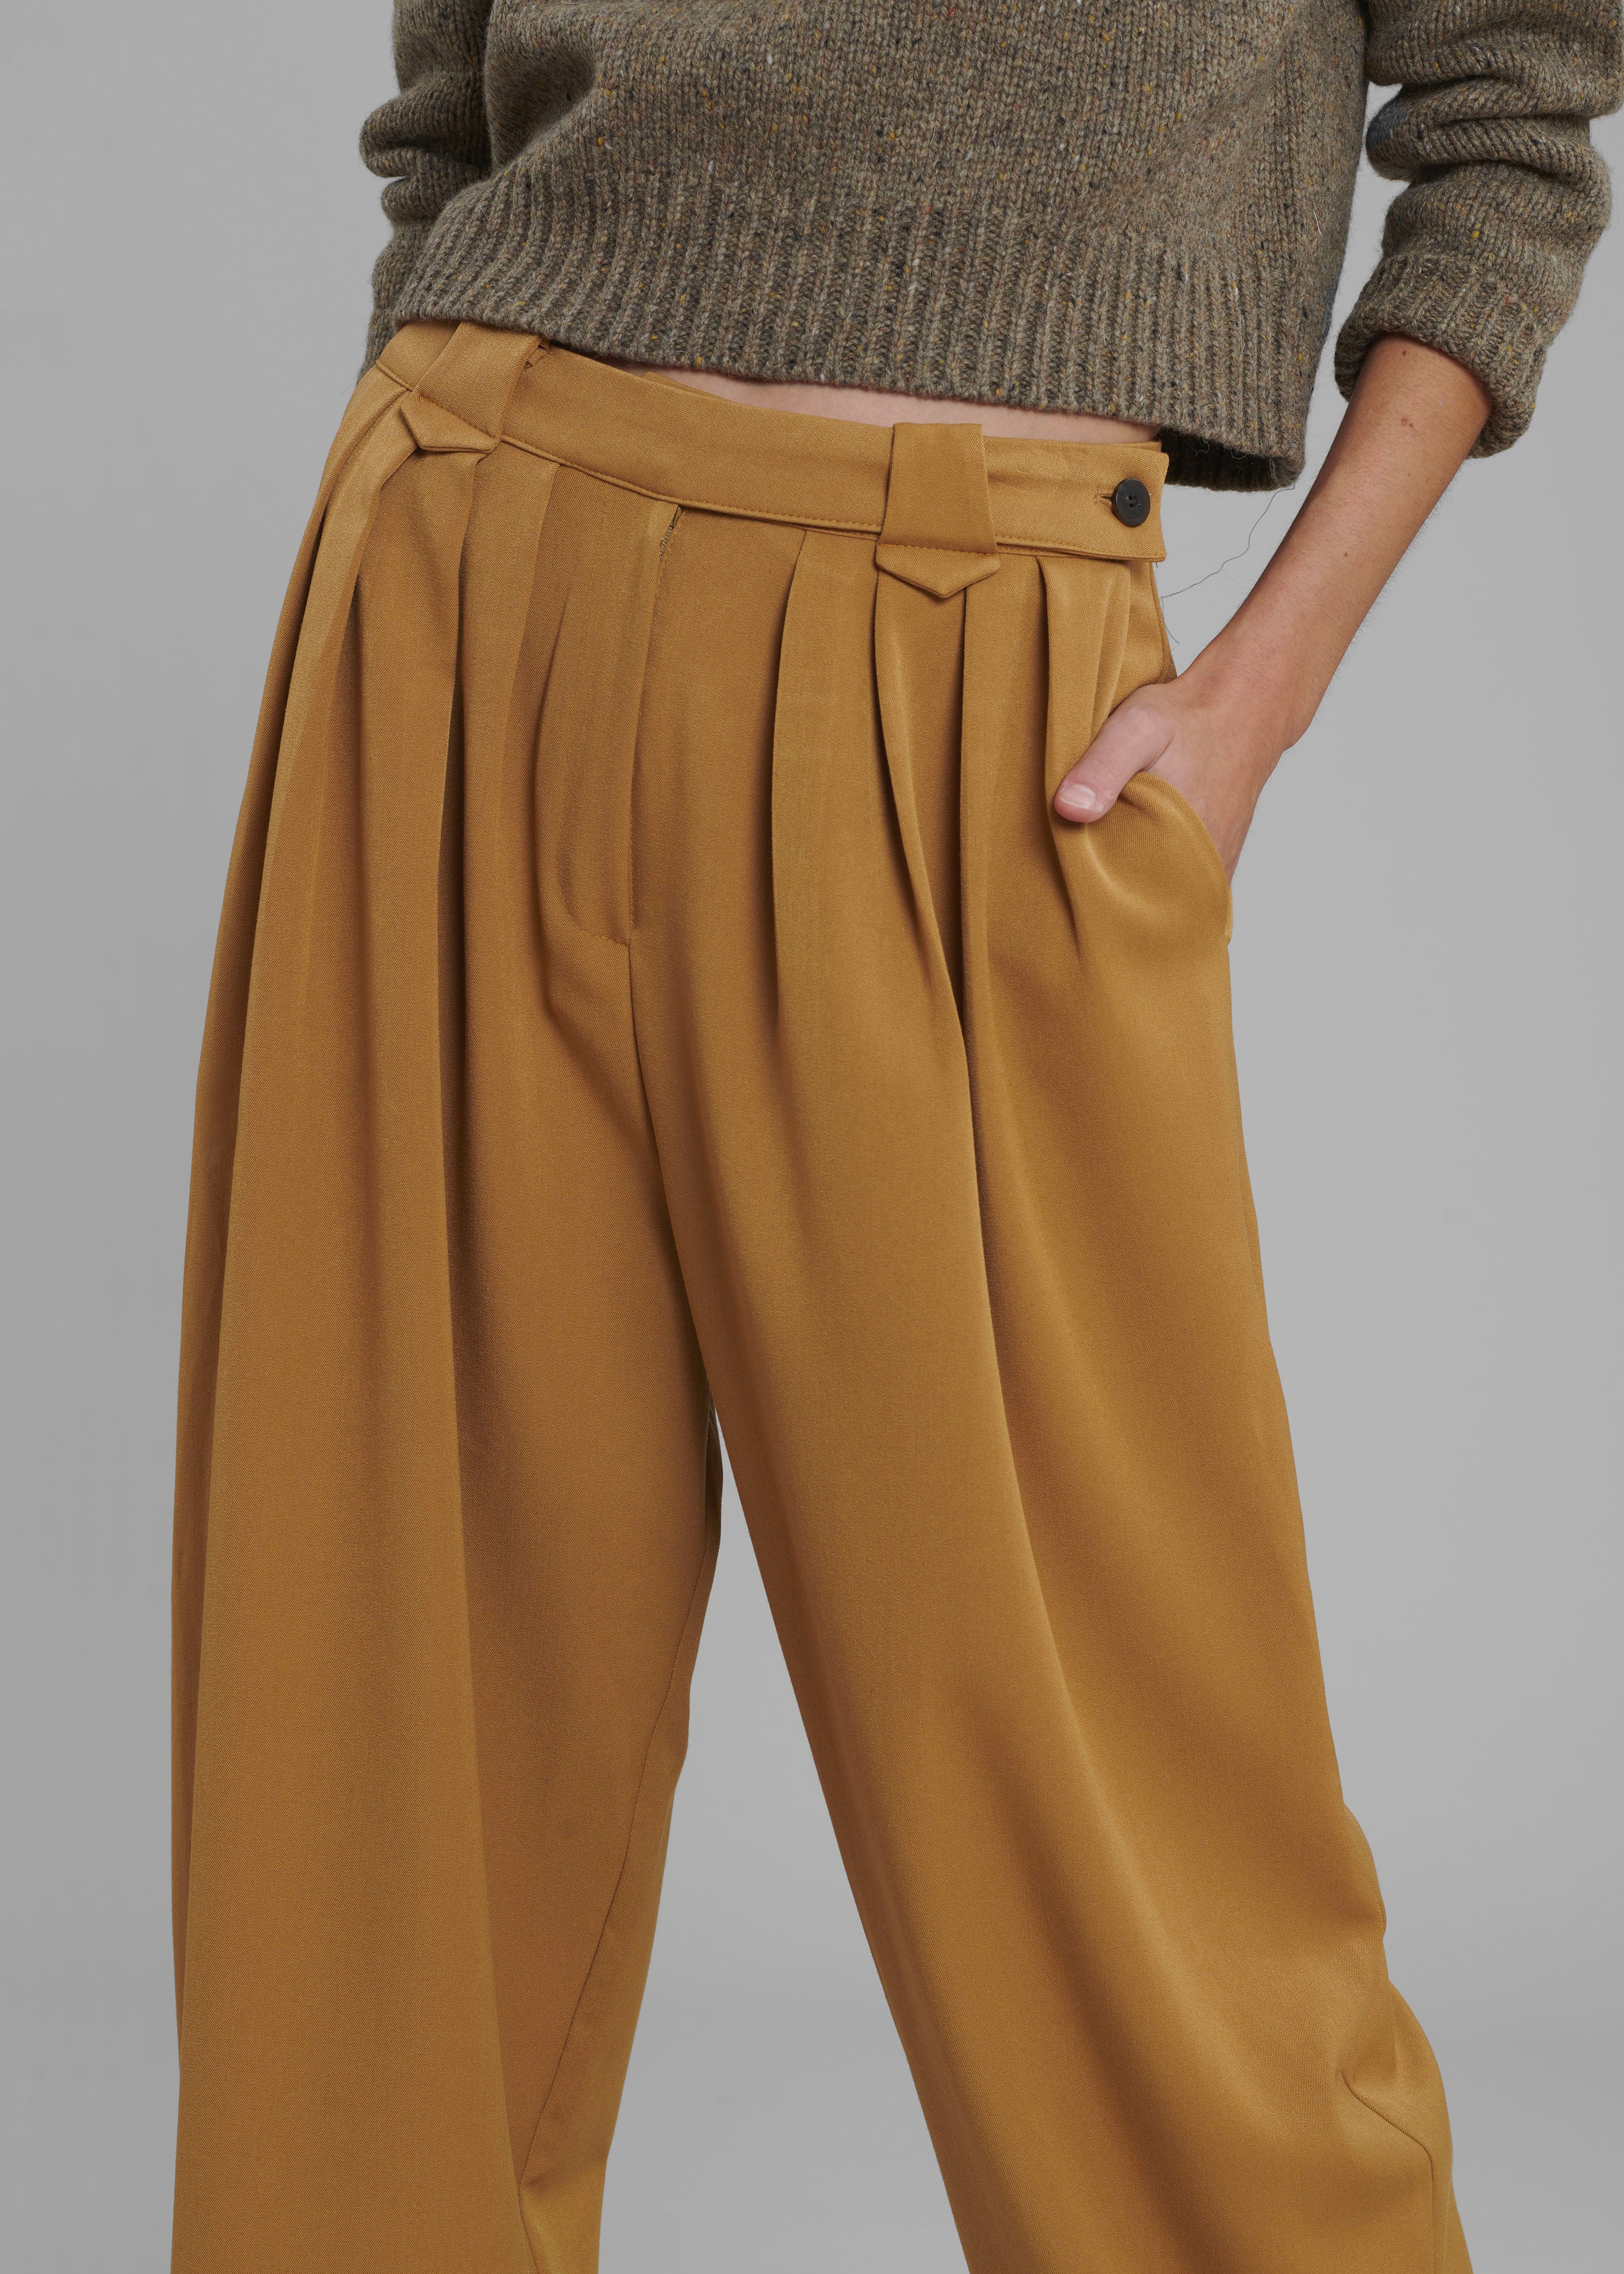 Luce Pleated Pants - Ginger - 2